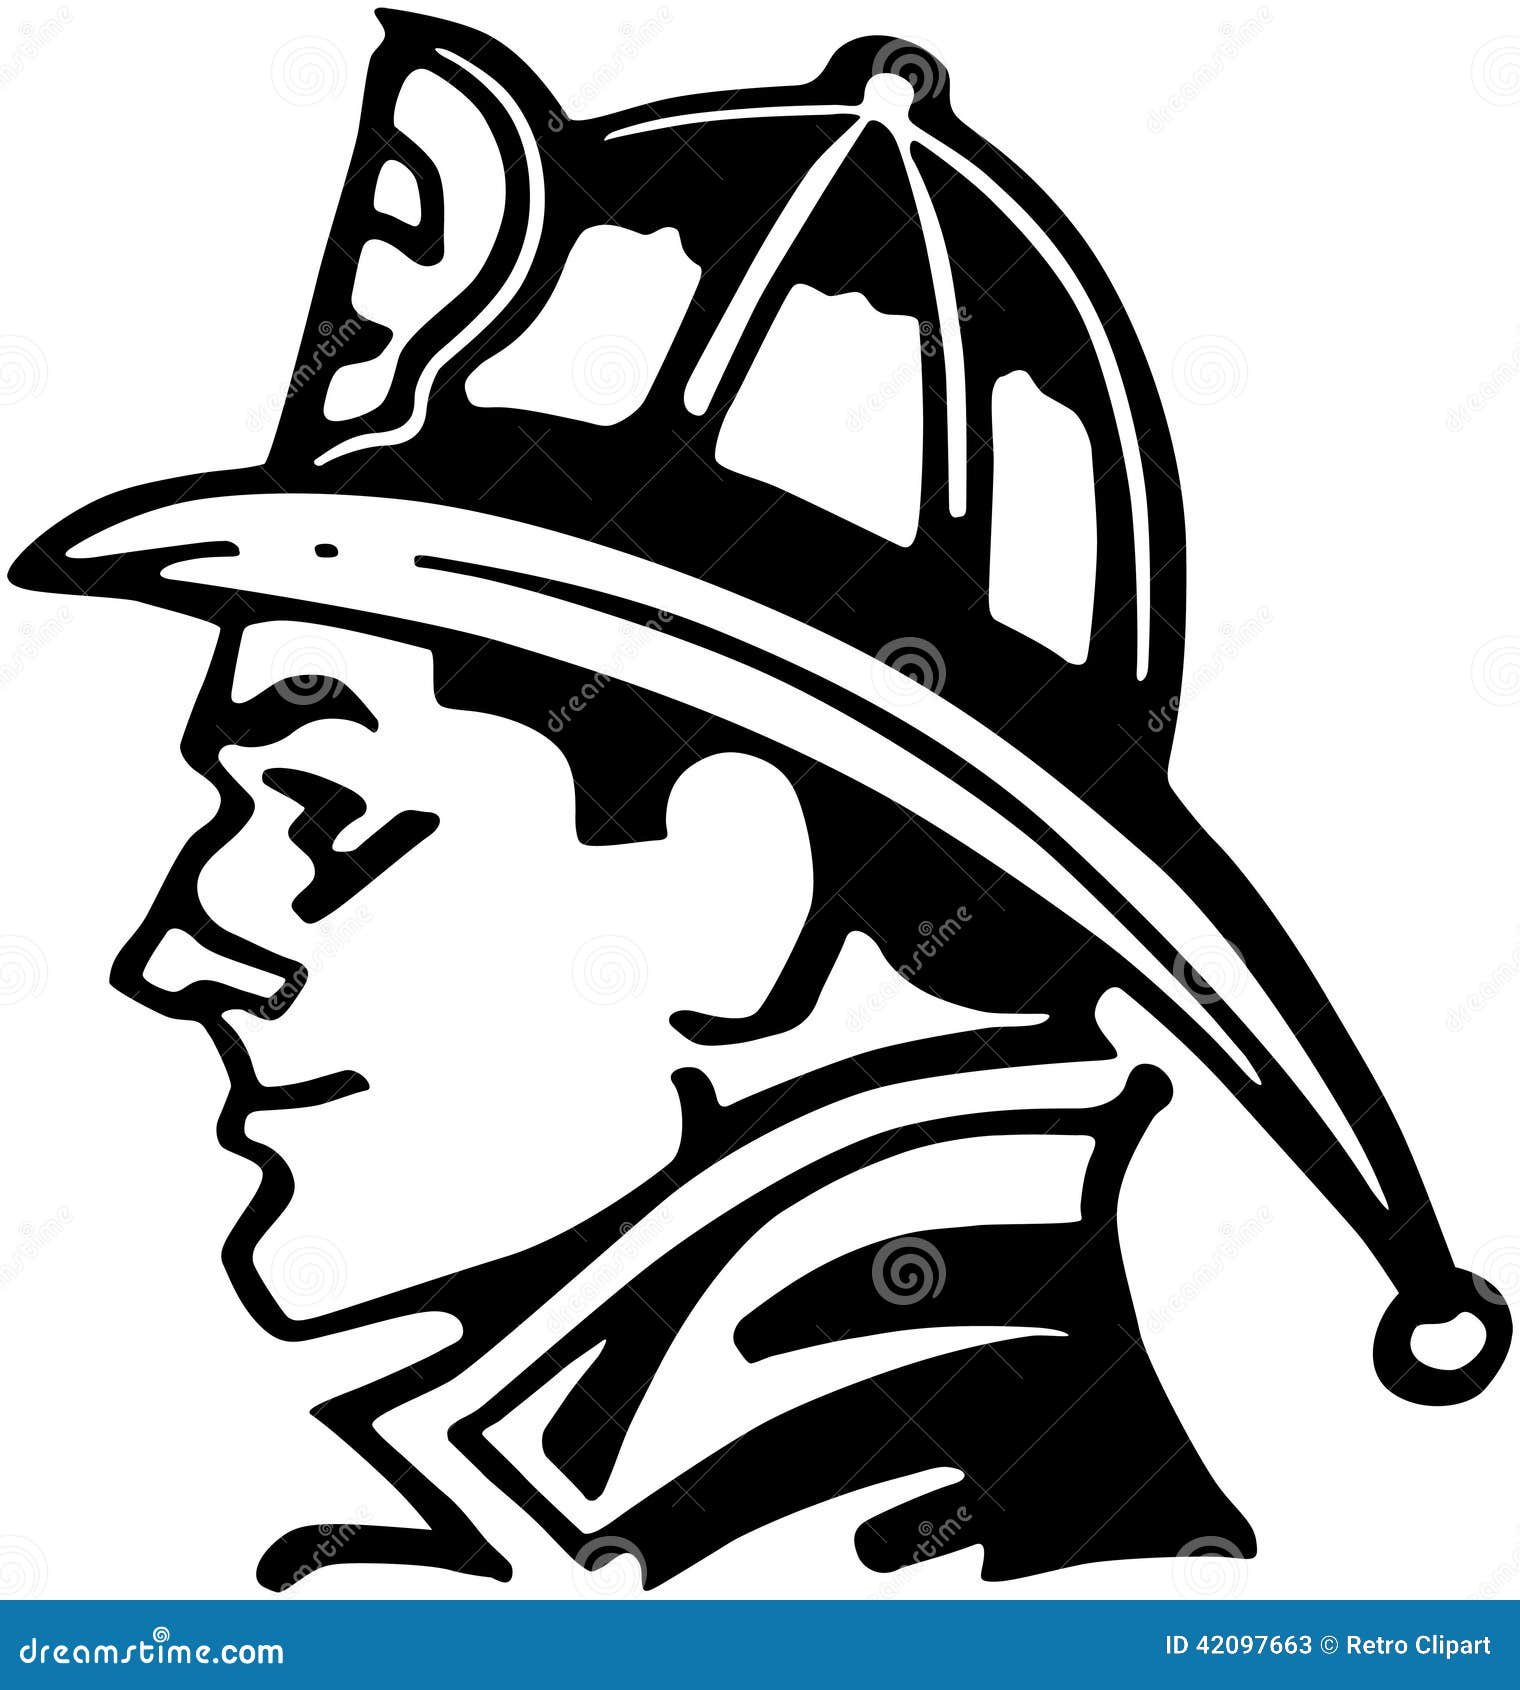 FiremanIcon Illustration about advertising, fires, 1950, graphics, clipart,...